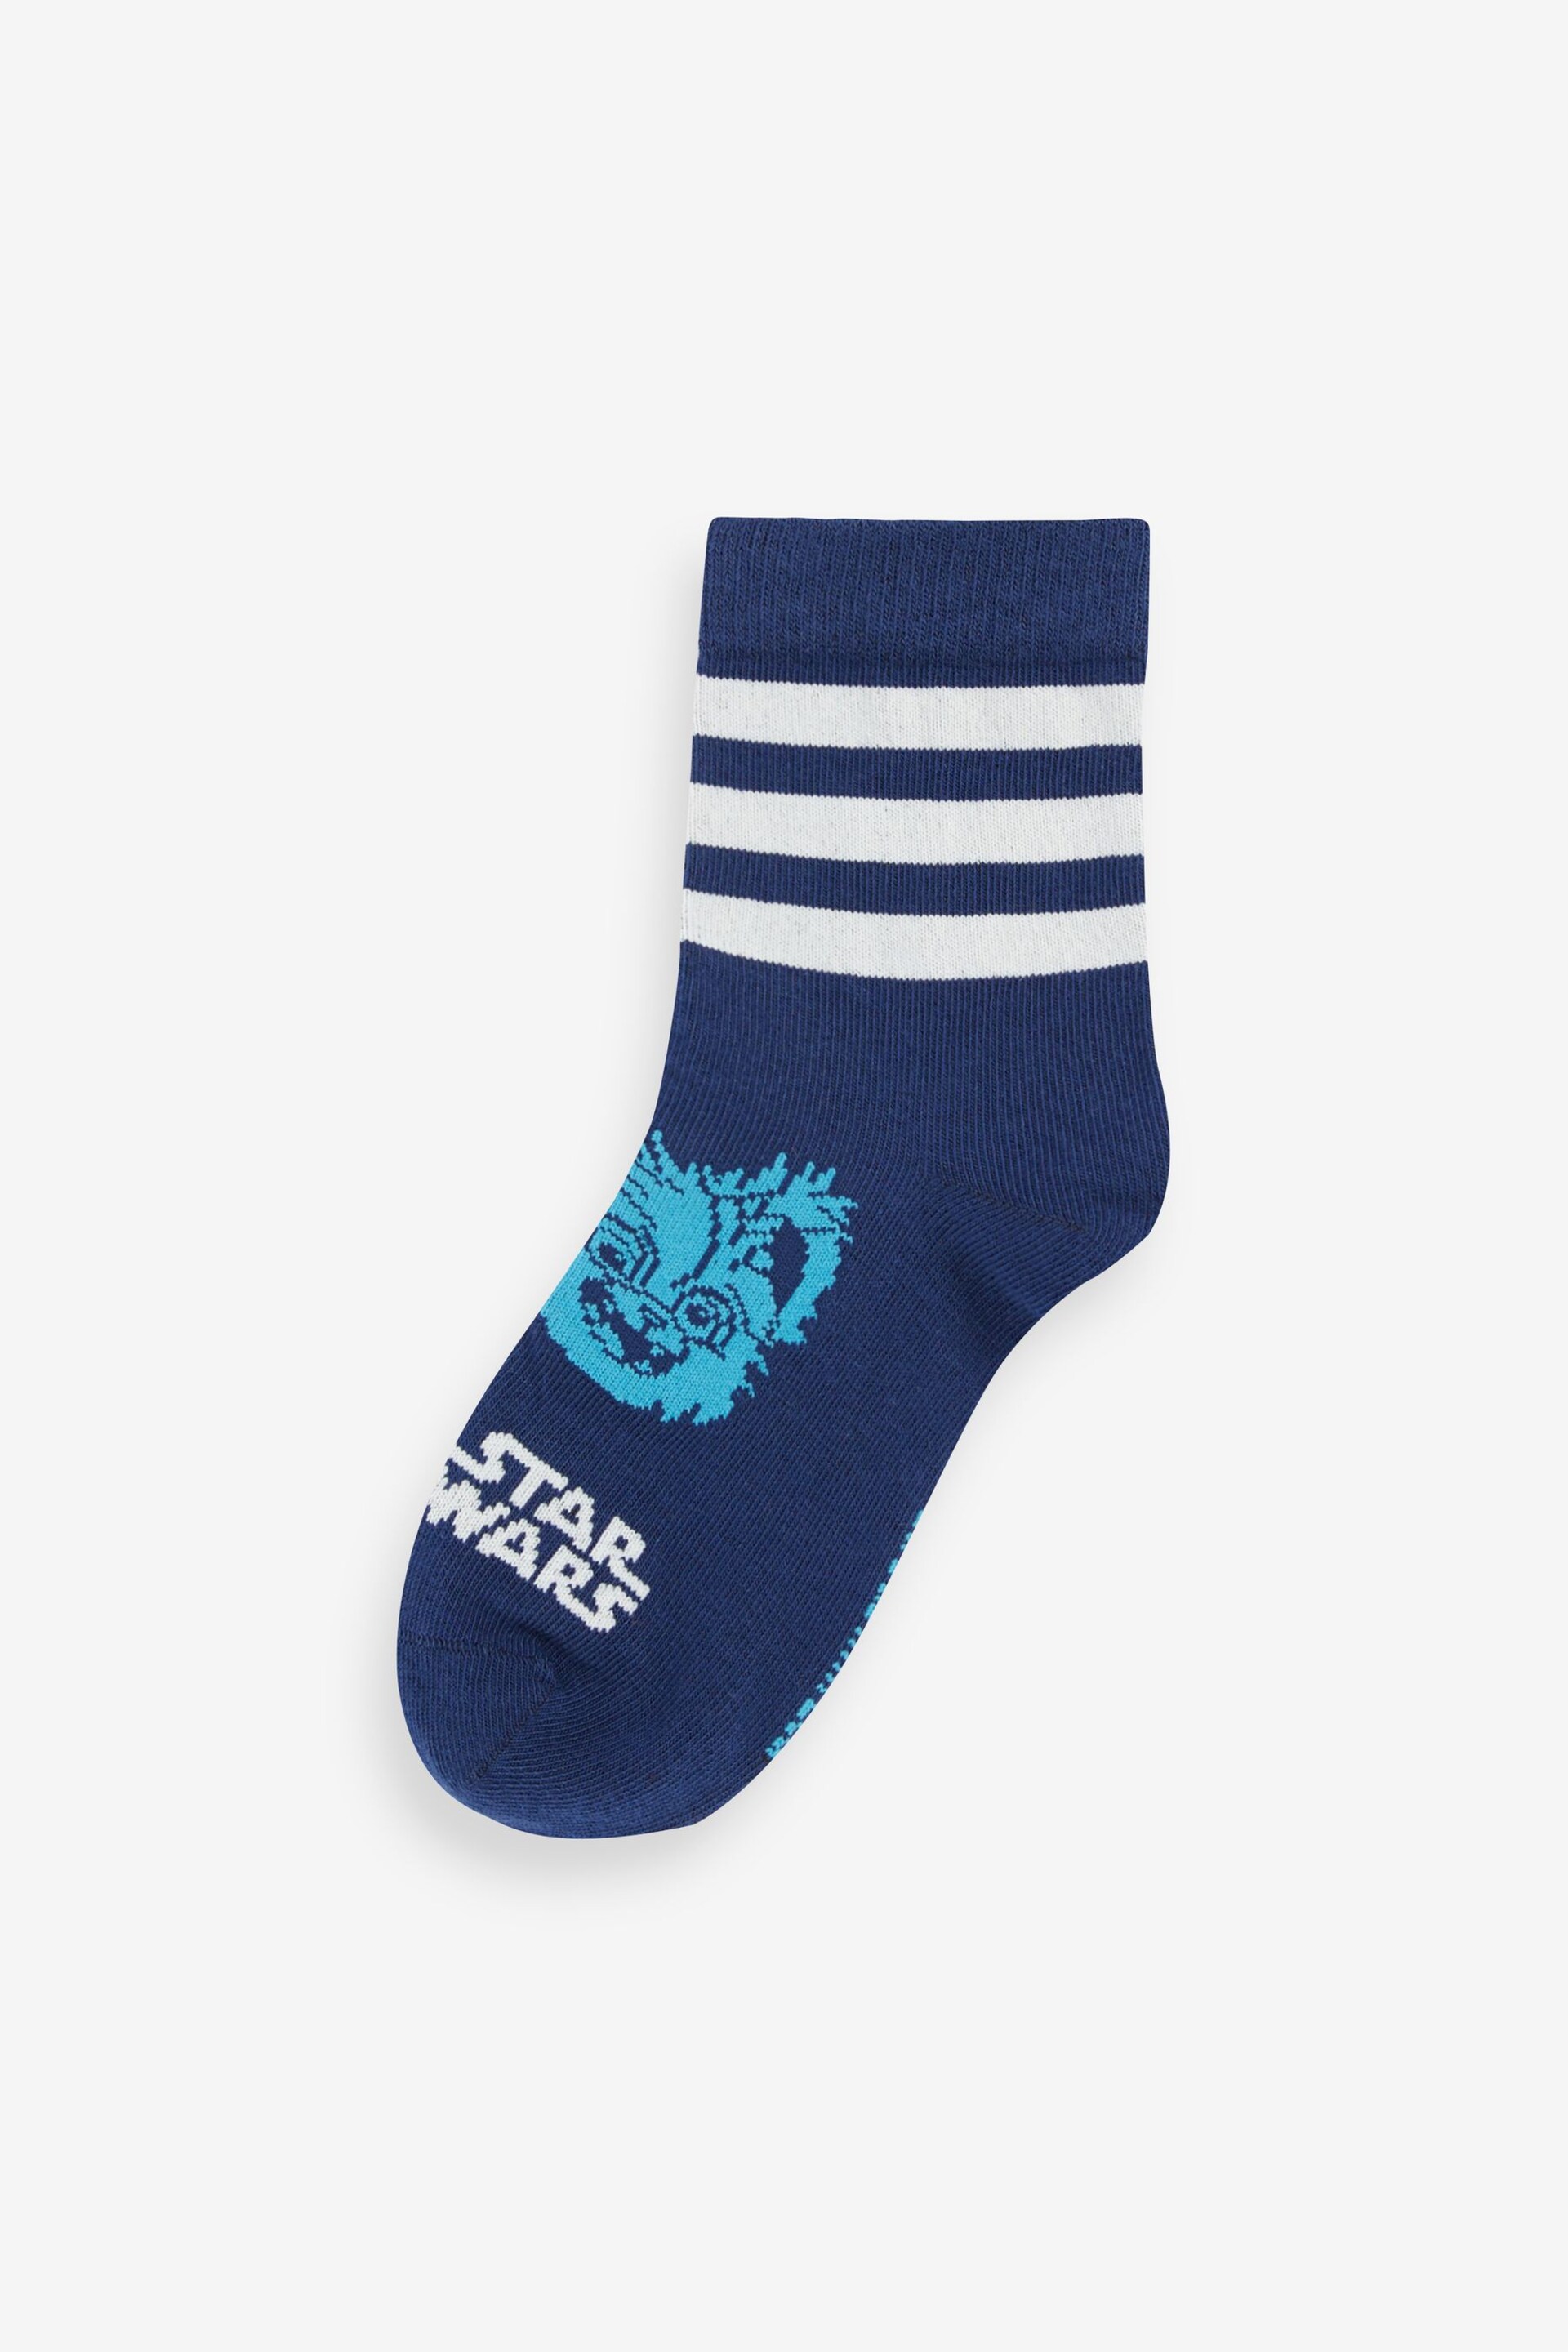 adidas Blue Star Wars Young Jedi Socks 3 Pack - Image 7 of 7